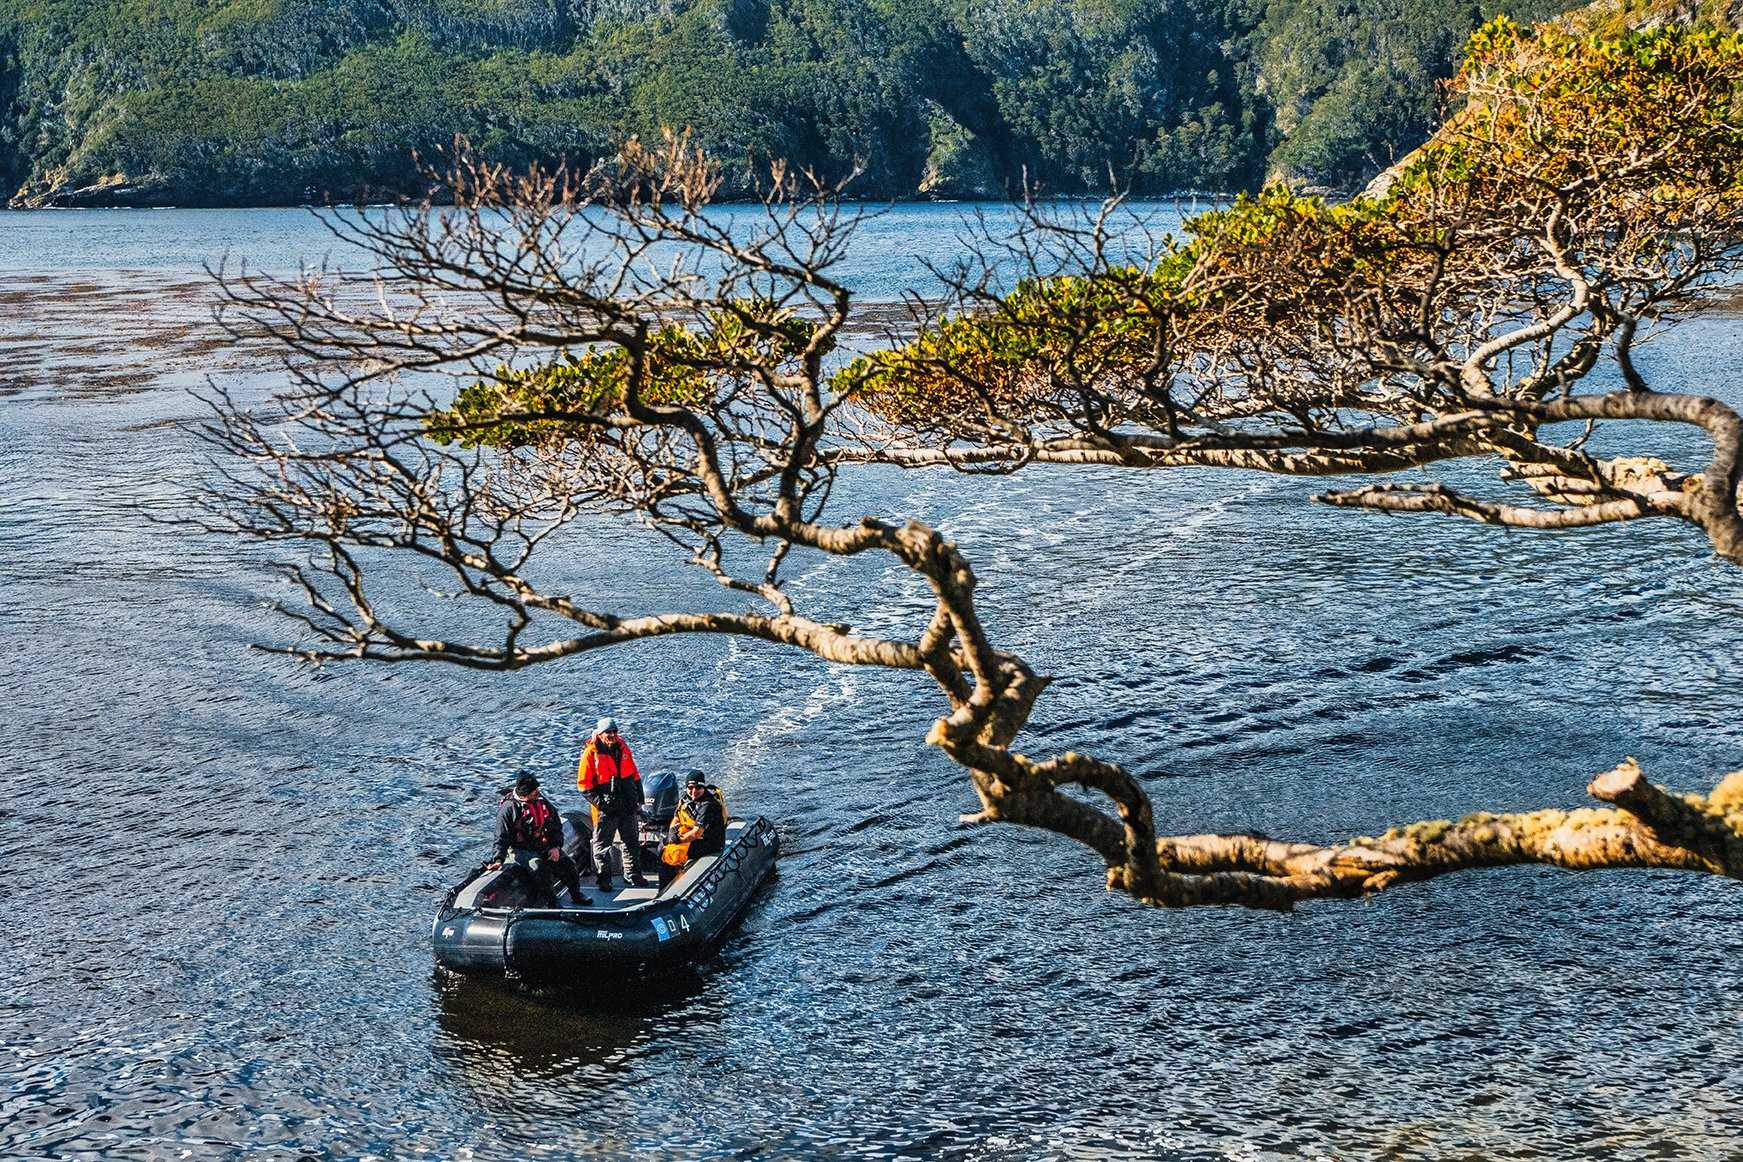 A Zodiac with two guests and a naturalist cruise in Isla de los Estados, Argentina with a tree in the foreground.